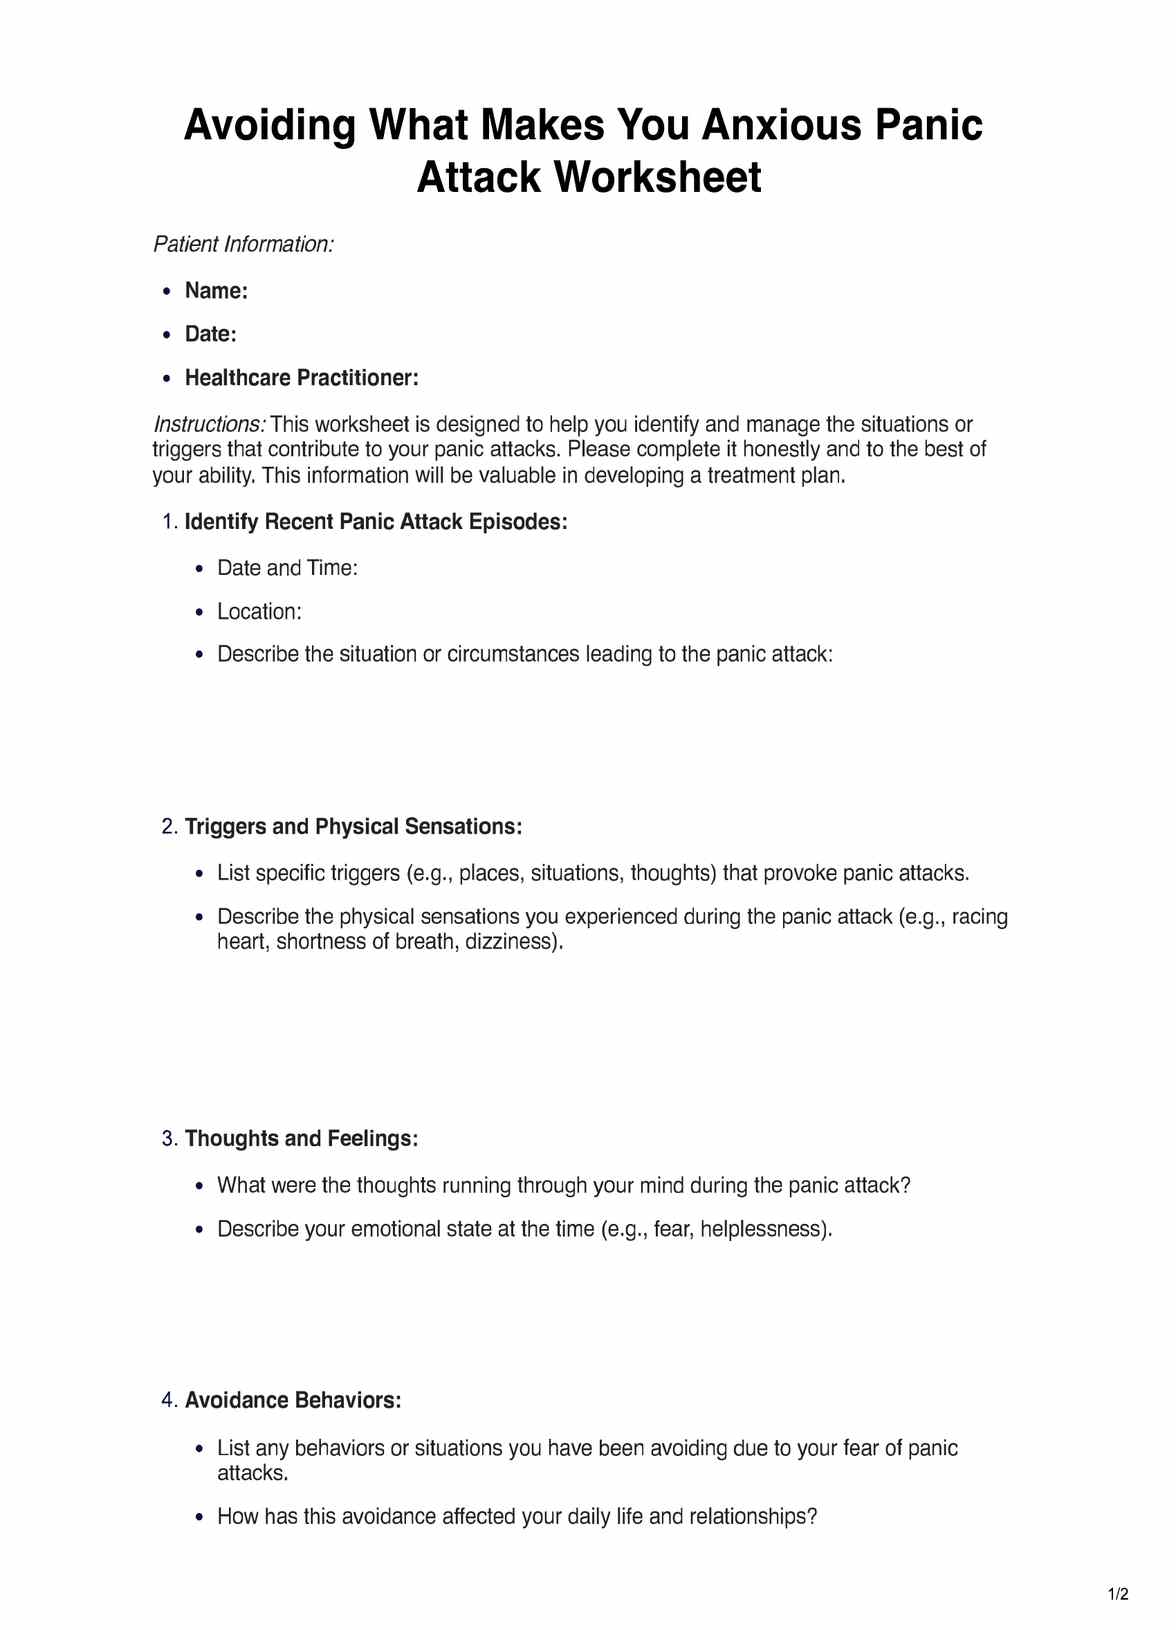 Avoiding What Makes You Anxious Panic Attack Worksheet PDF Example